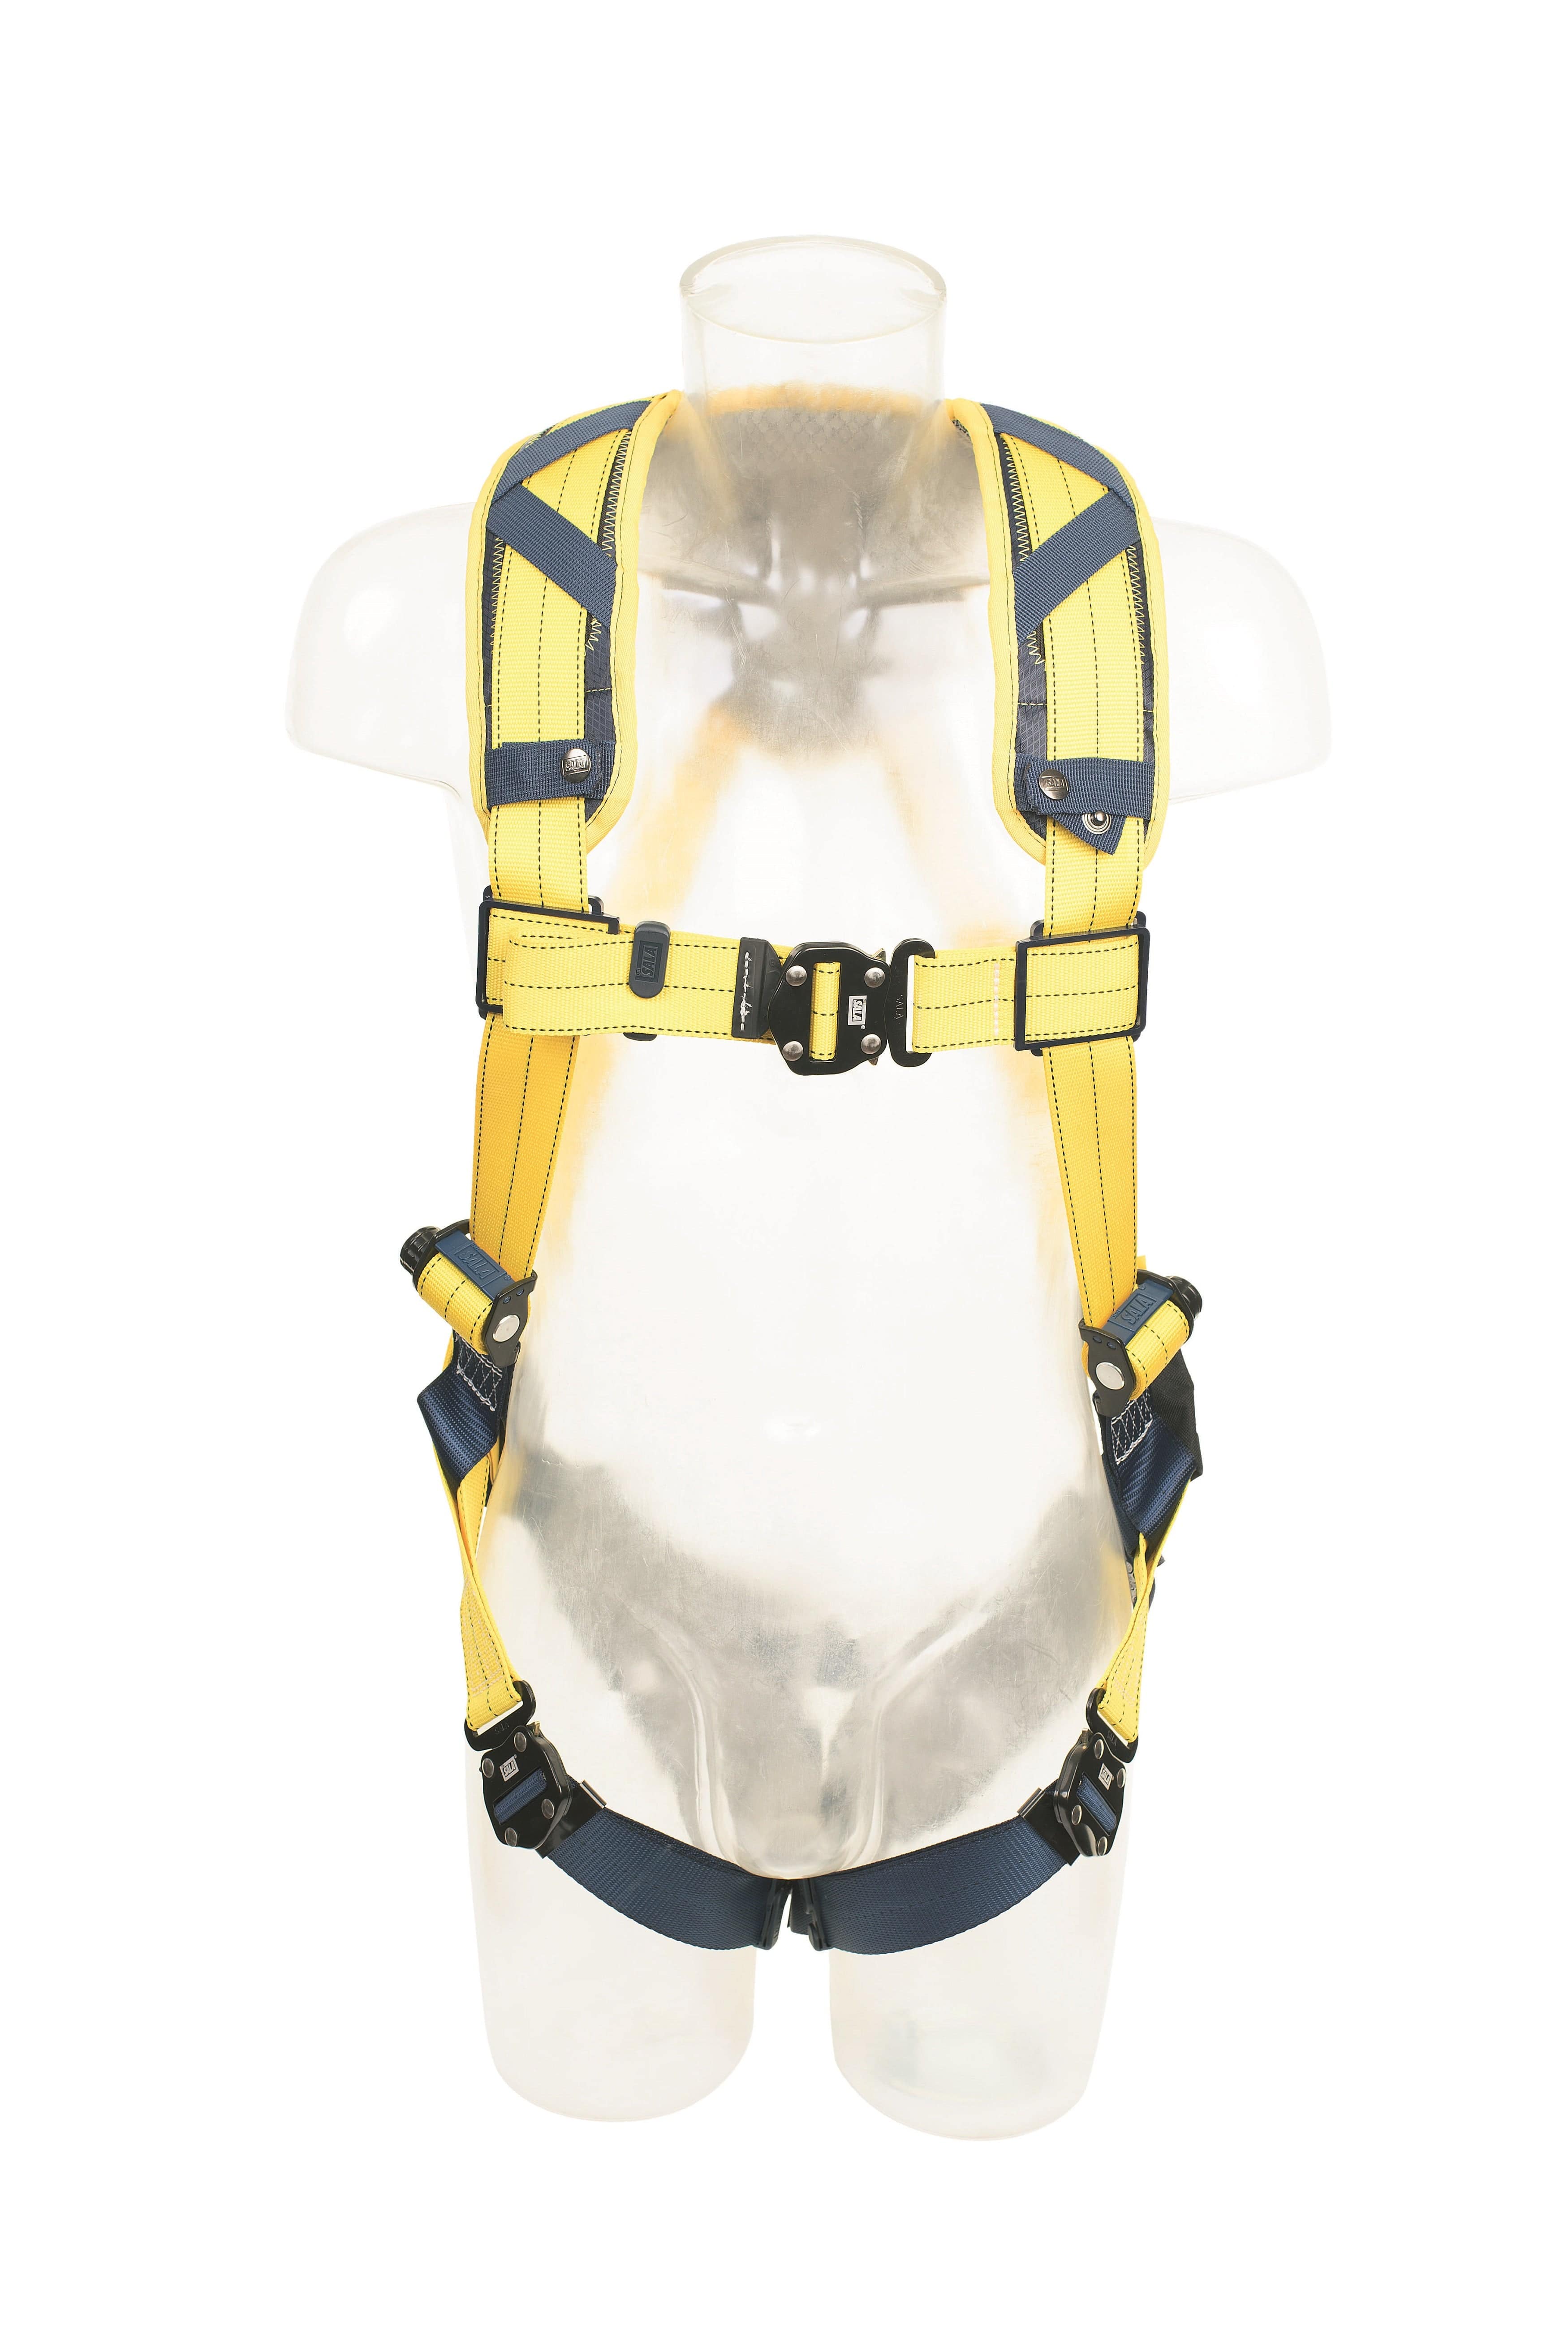 3M DBI SALA Delta Quick Connect Comfort Harness with Rear Attachment Point - SecureHeights